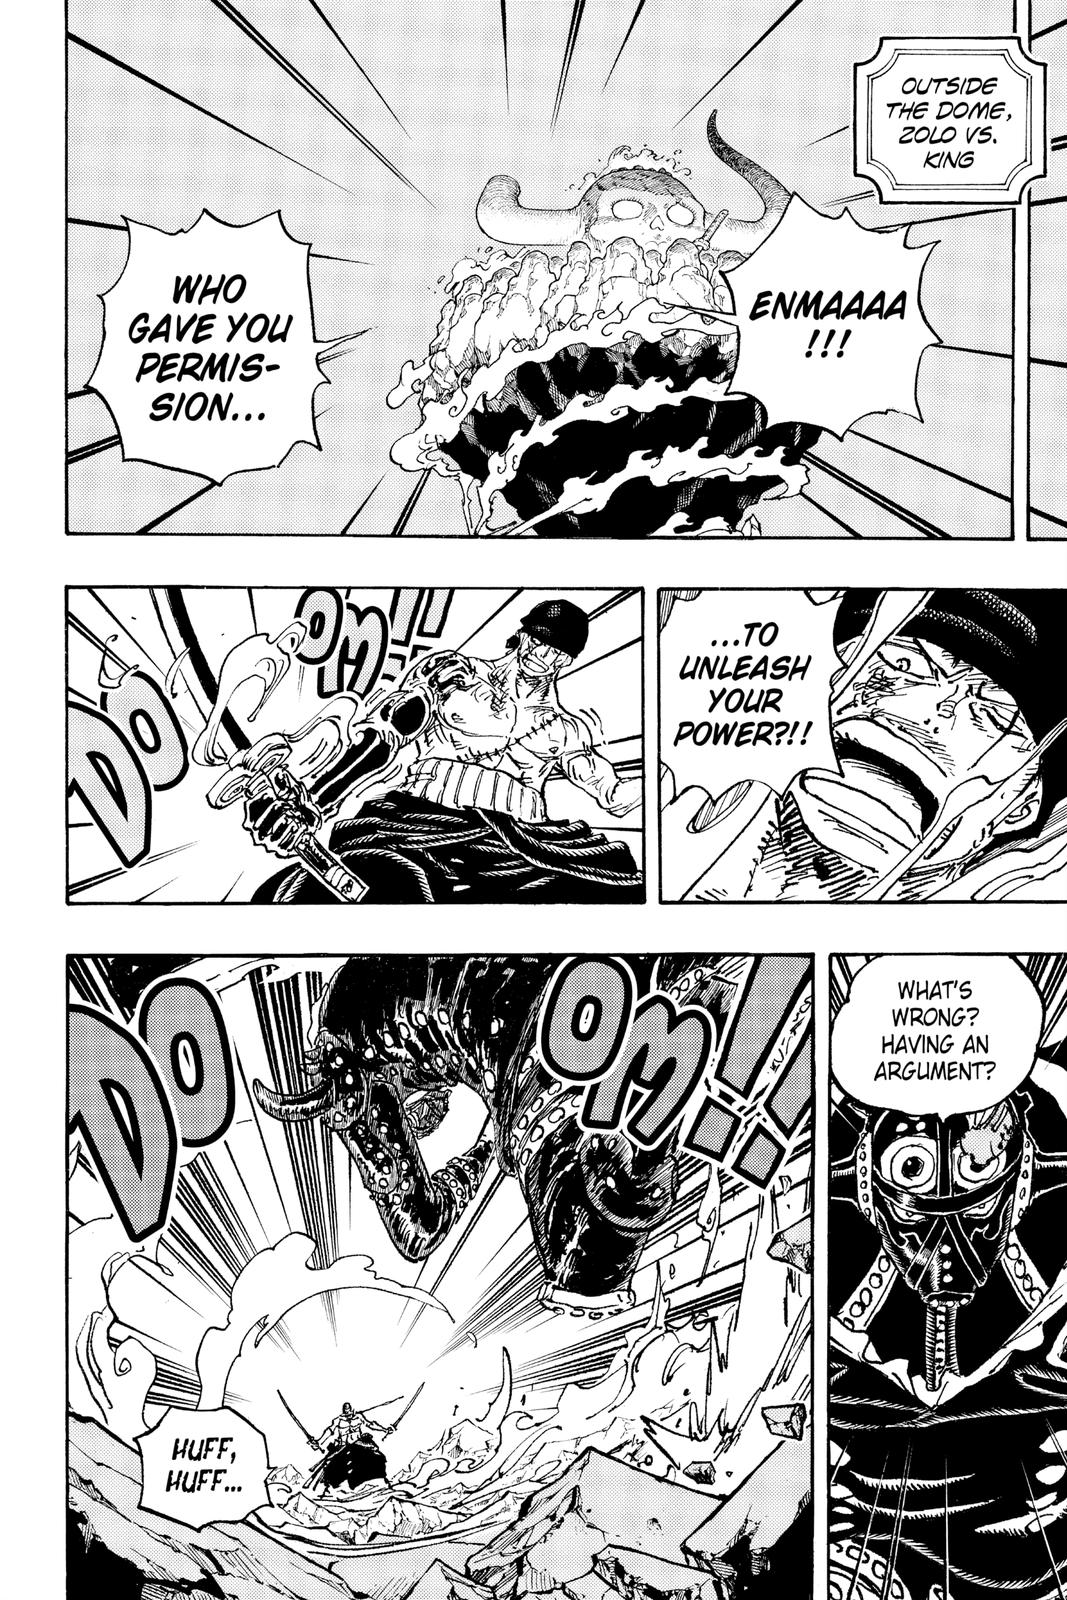 Zoro understands Luffy — Enma, huh? If I get used to using this thing